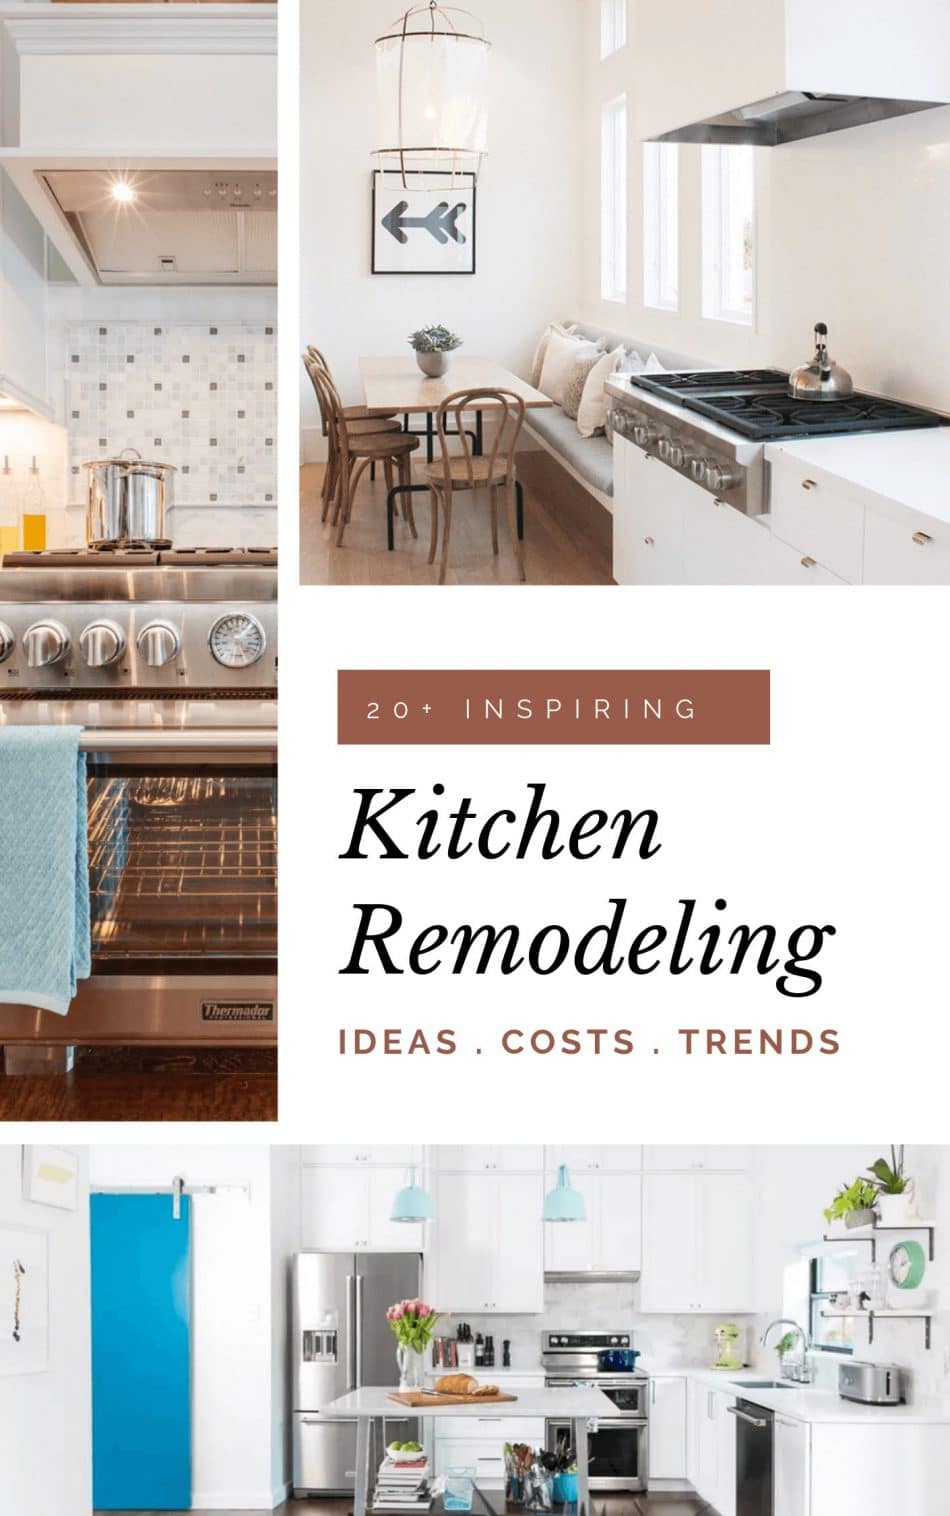 20+ Inspiring Kitchen Remodeling Ideas, Costs, & Trends